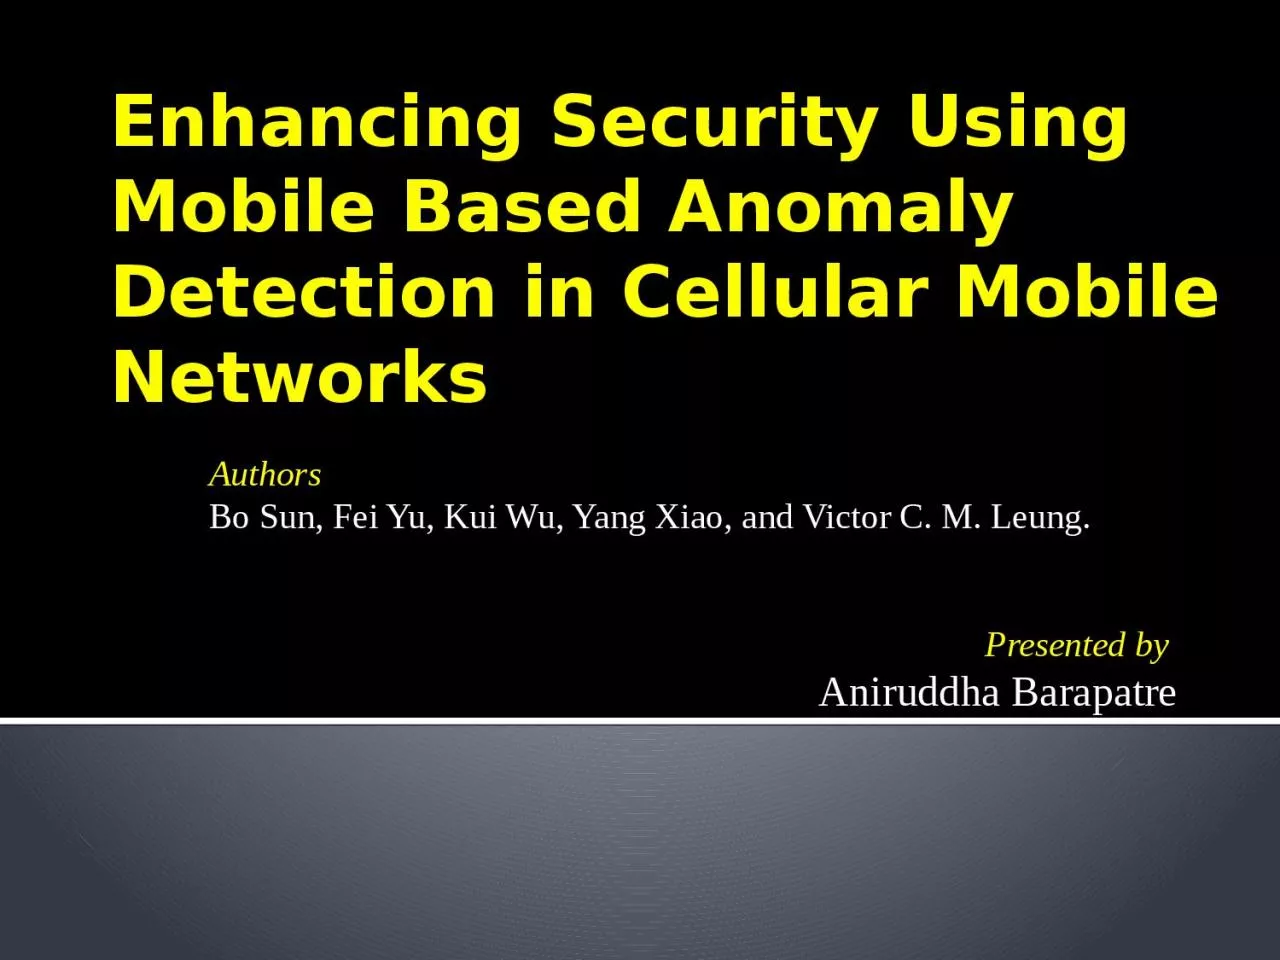 Enhancing Security Using Mobile Based Anomaly Detection in Cellular Mobile Networks